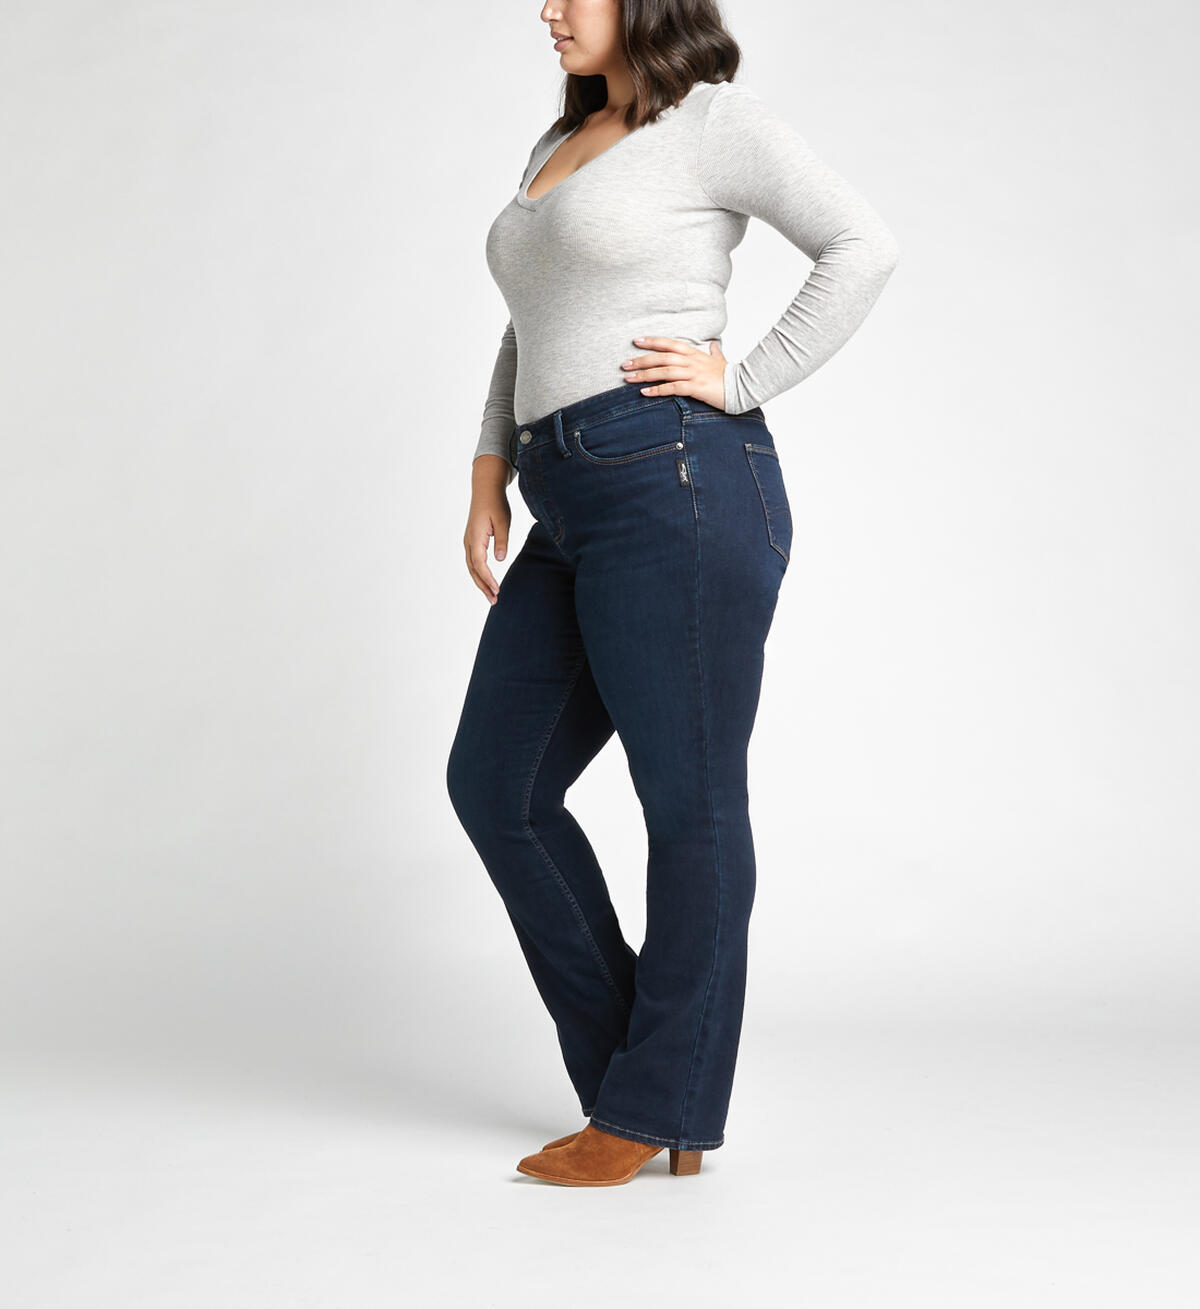 Avery High Rise Slim Bootcut Jeans Plus Size, Indigo, hi-res image number 2